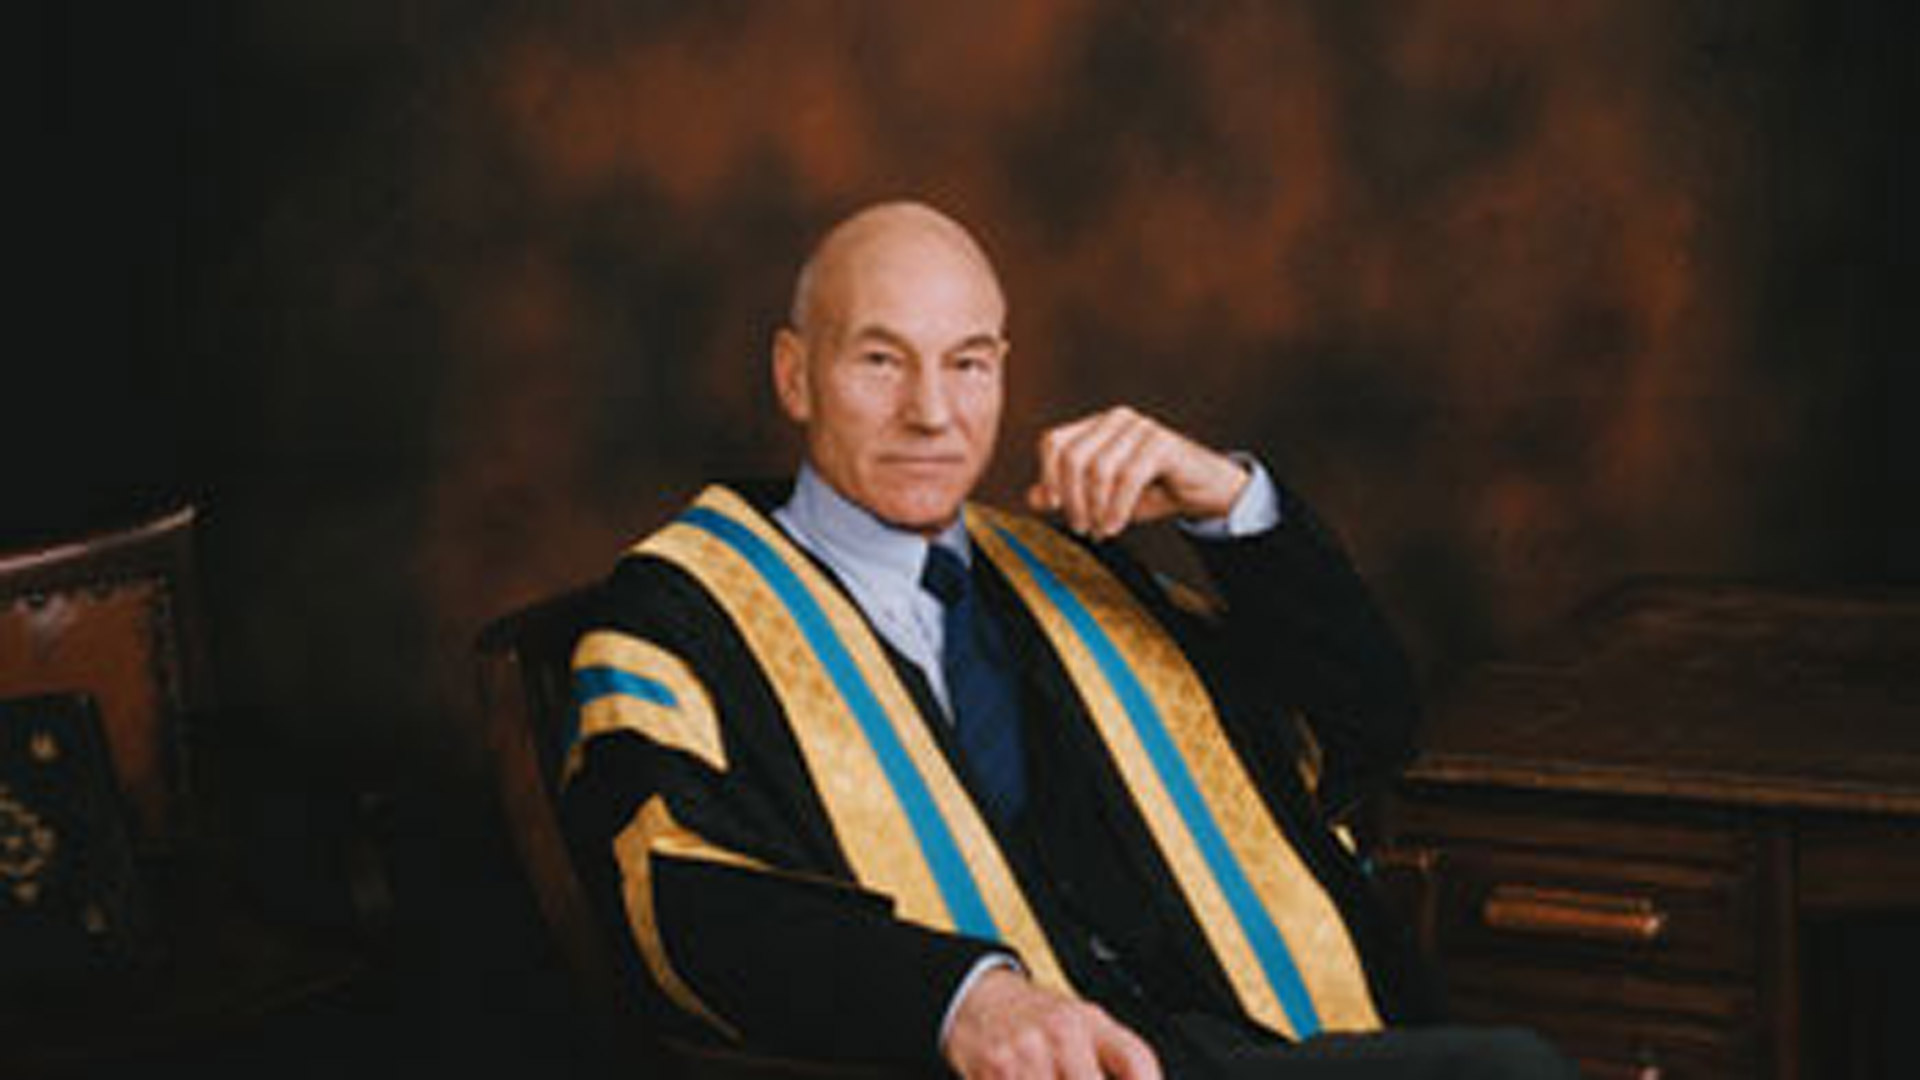 Sir Patrick Stewart as the Chancellor of the University of Huddersfield